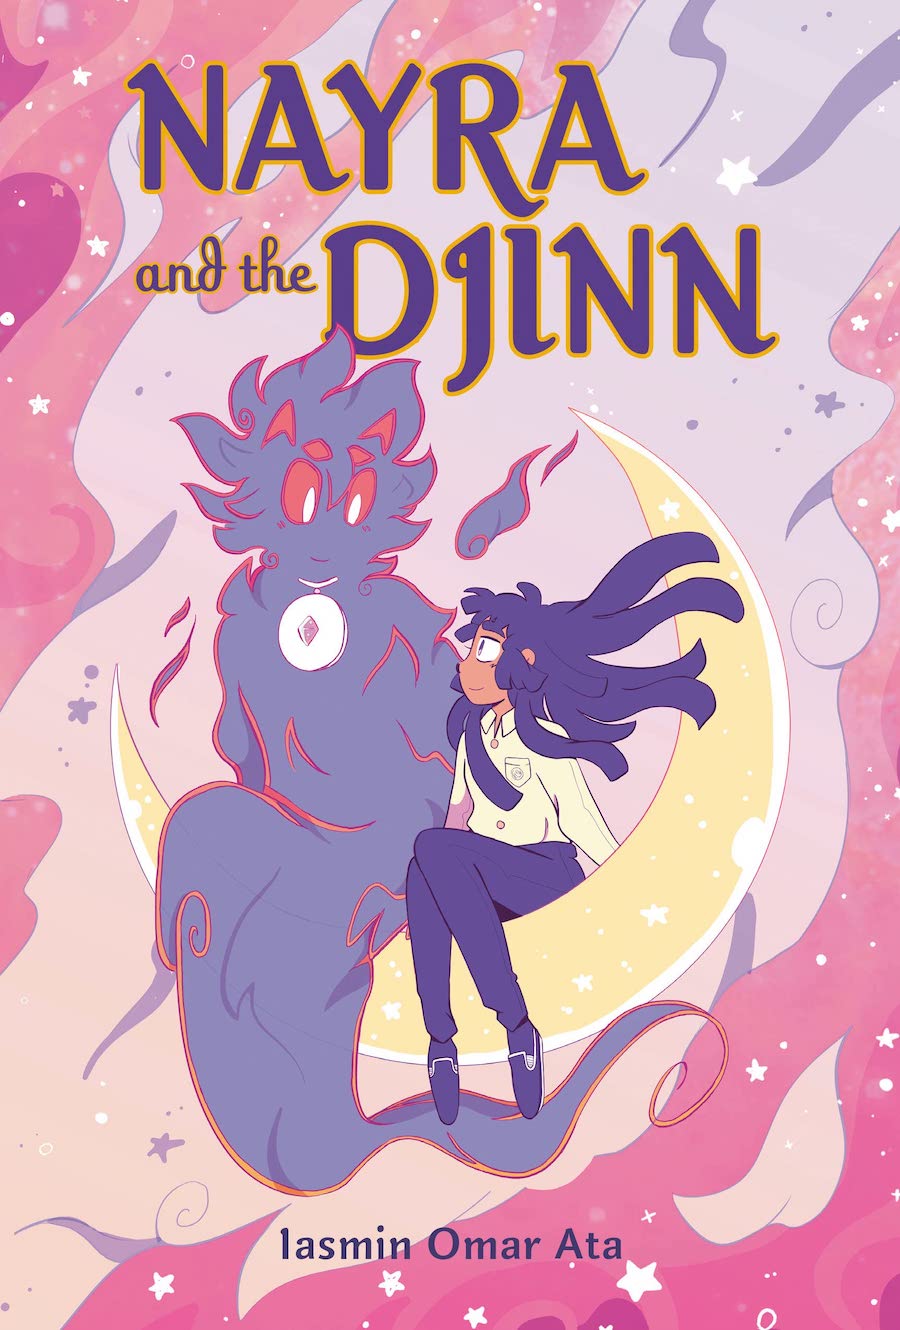 Cover of Nayra and the Djinn, showing a girl and a djinn sitting on a crescent moon